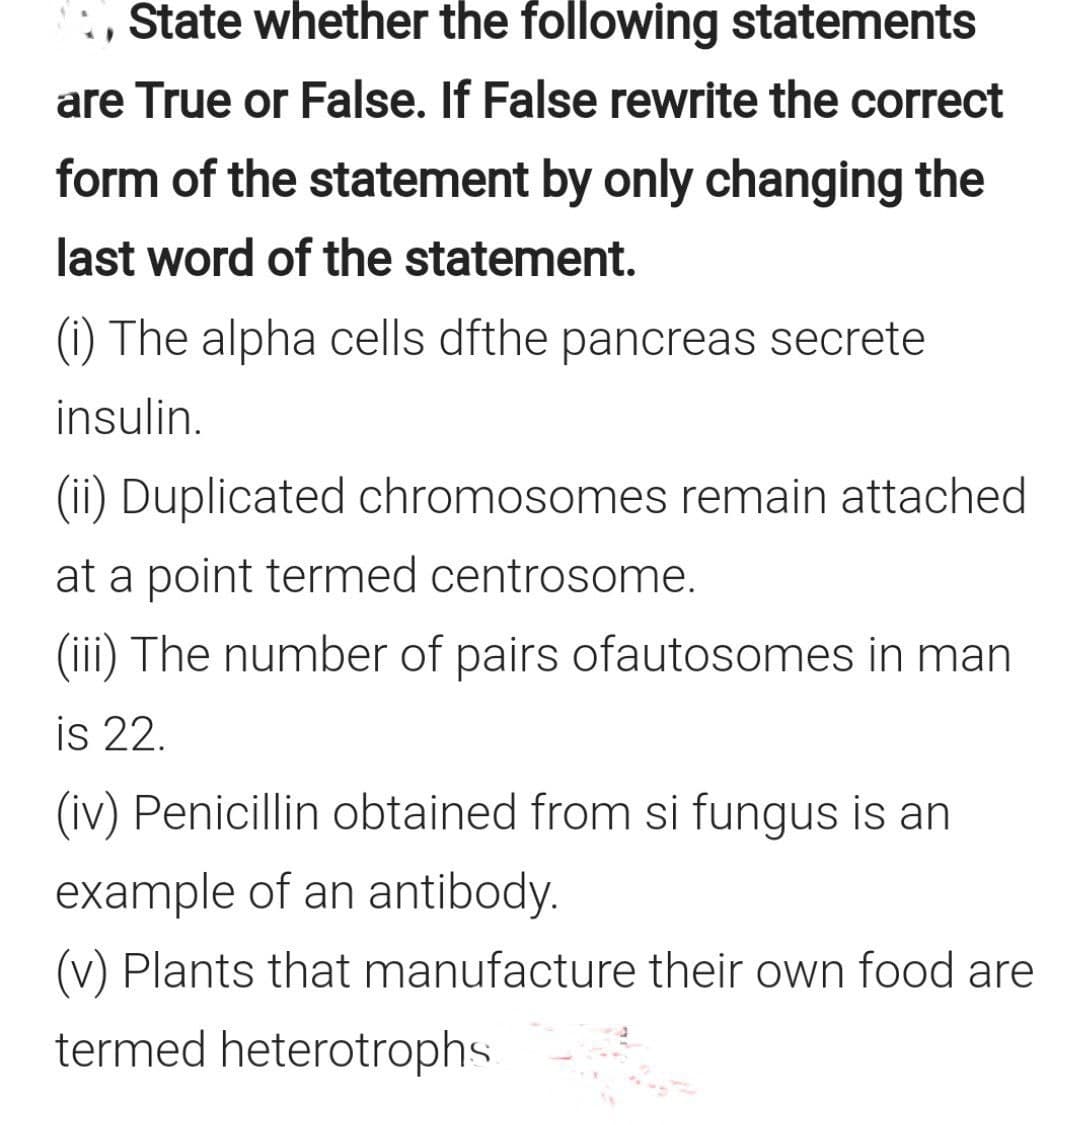 :, State whether the following statements
are True or False. If False rewrite the correct
form of the statement by only changing the
last word of the statement.
(i) The alpha cells dfthe pancreas secrete
insulin.
(ii) Duplicated chromosomes remain attached
at a point termed centrosome.
(iii) The number of pairs ofautosomes in man
is 22.
(iv) Penicillin obtained from si fungus is an
example of an antibody.
(v) Plants that manufacture their own food are
termed heterotrophs
